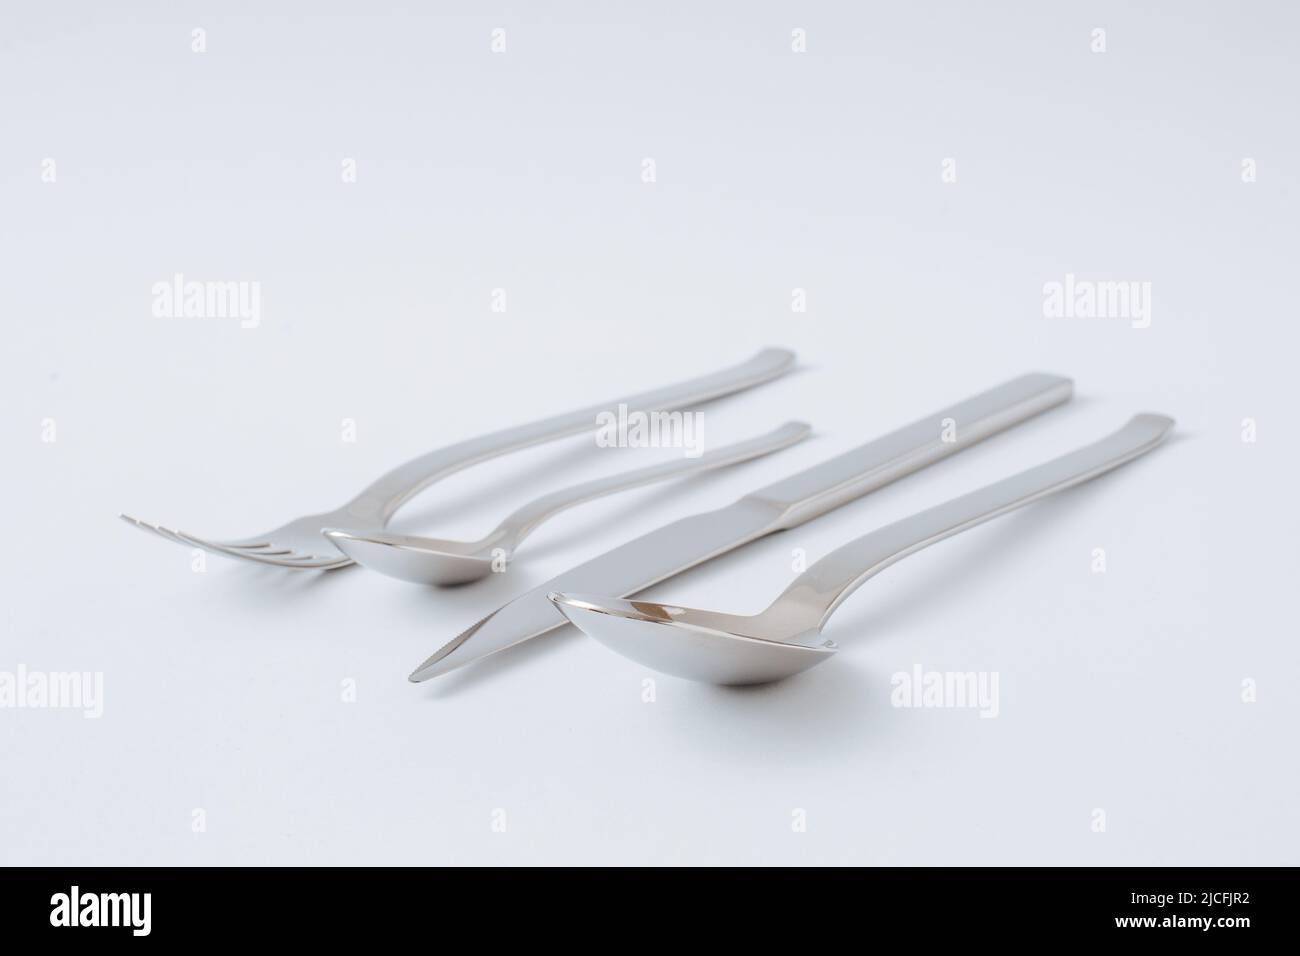 Stainless steel cutlery set, knife, spoon, fork, teaspoon on a white background, copy space. Stock Photo